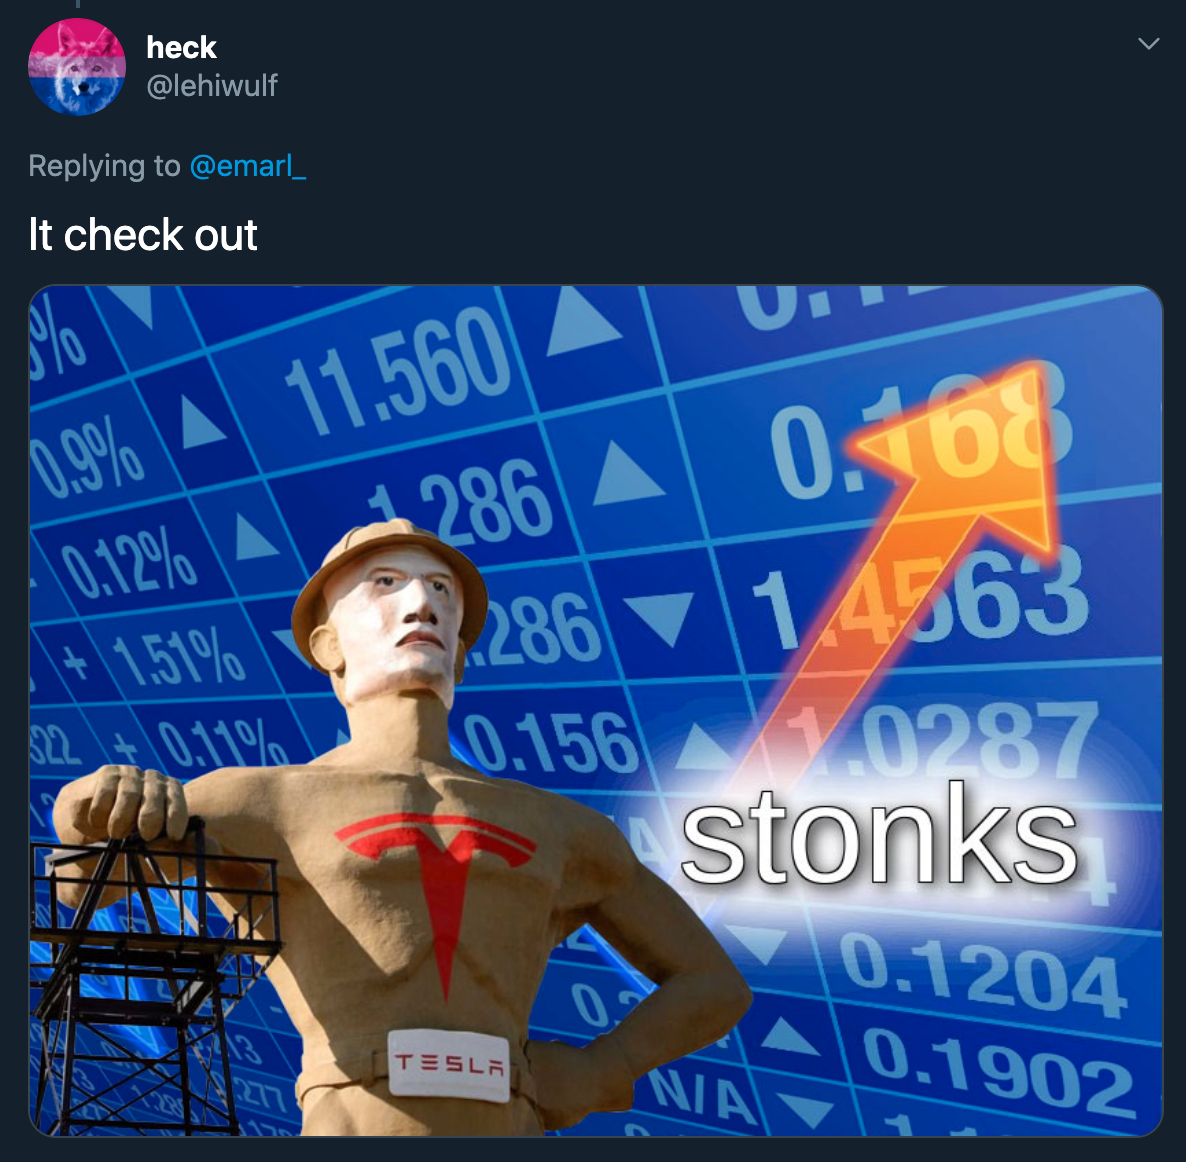 It check out - elon musk statue stonks